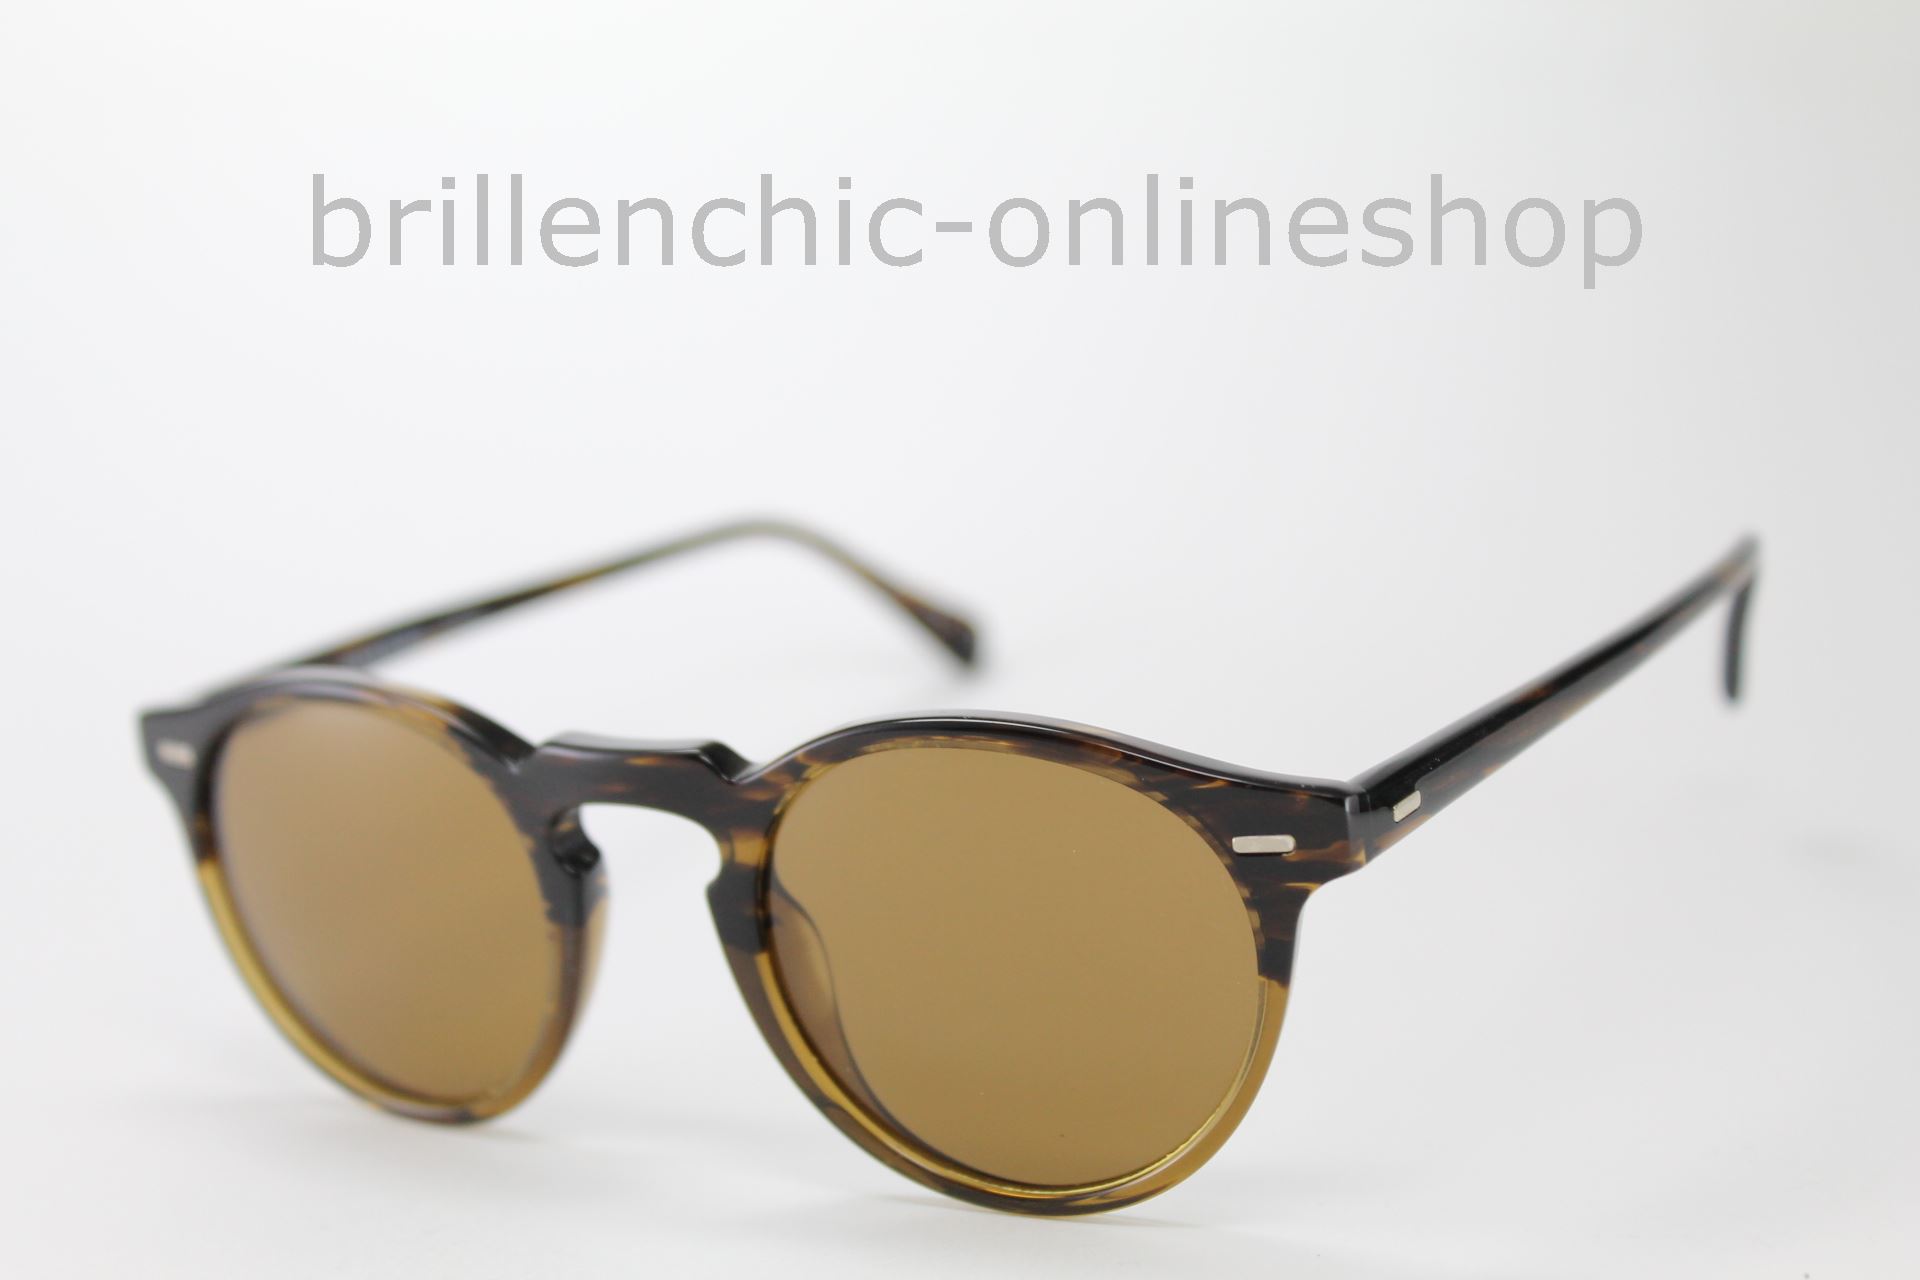 Brillenchic-onlineshop in Berlin - OLIVER PEOPLES GREGORY PECK SUN OV 5217S  5217 1001/53 